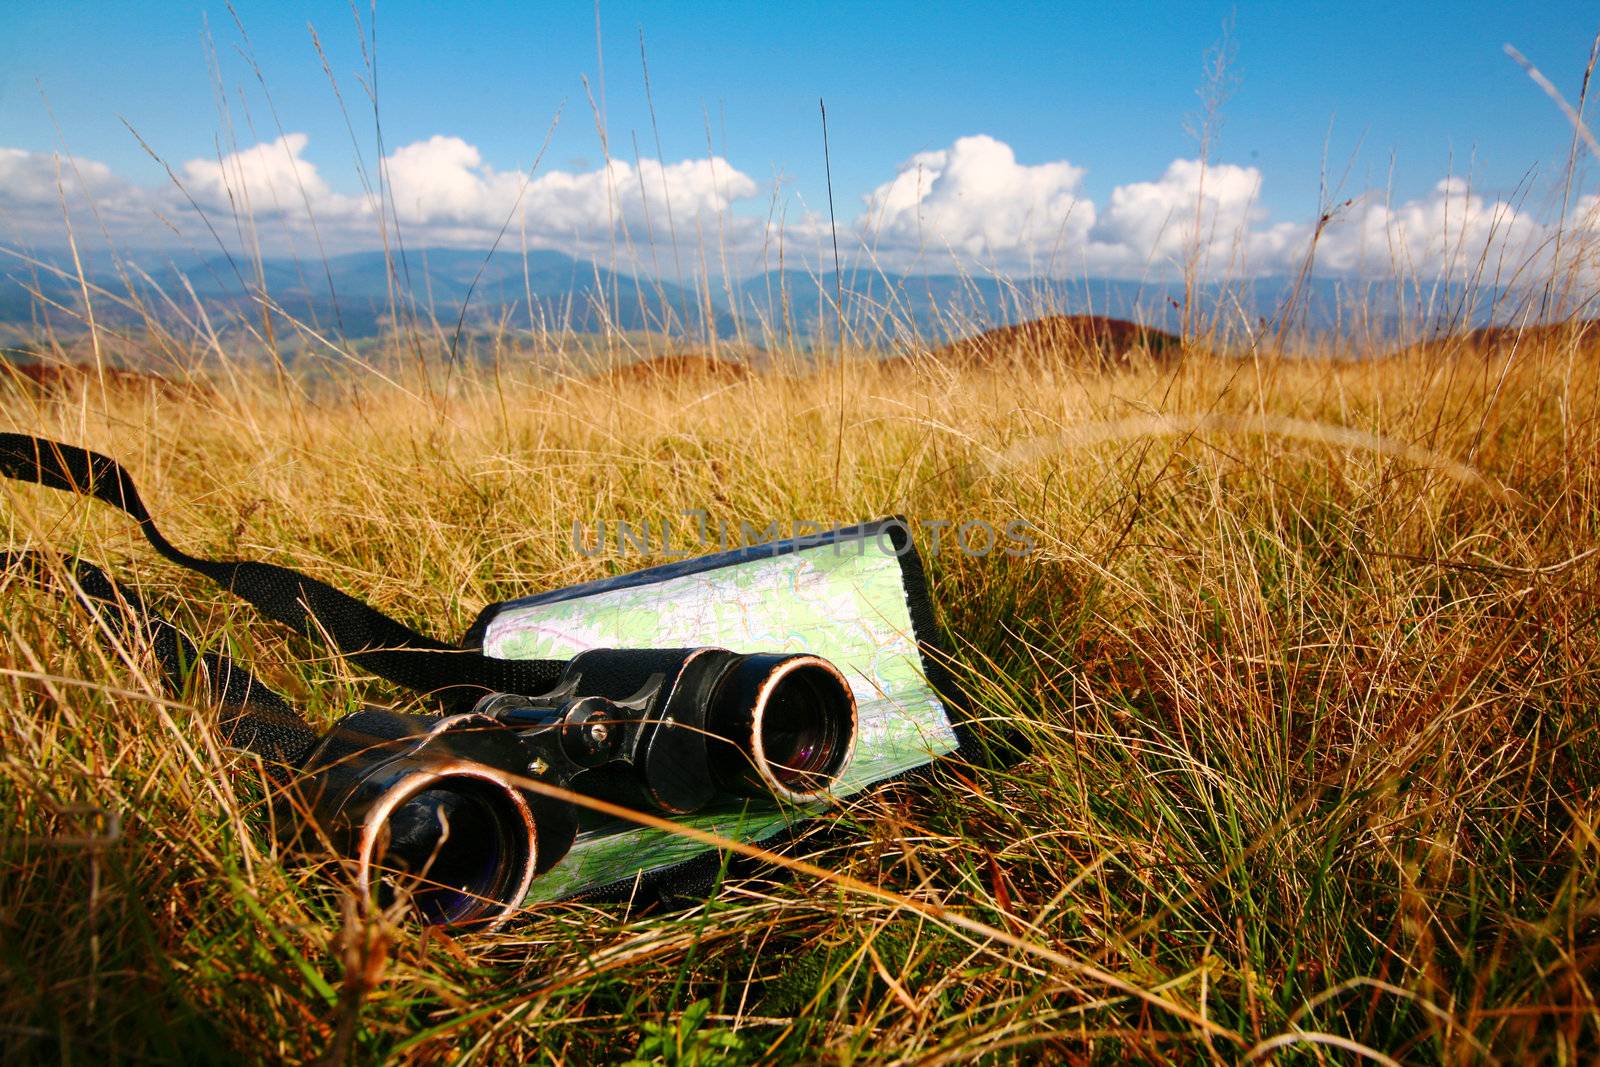 An image of binoculars and map on grass